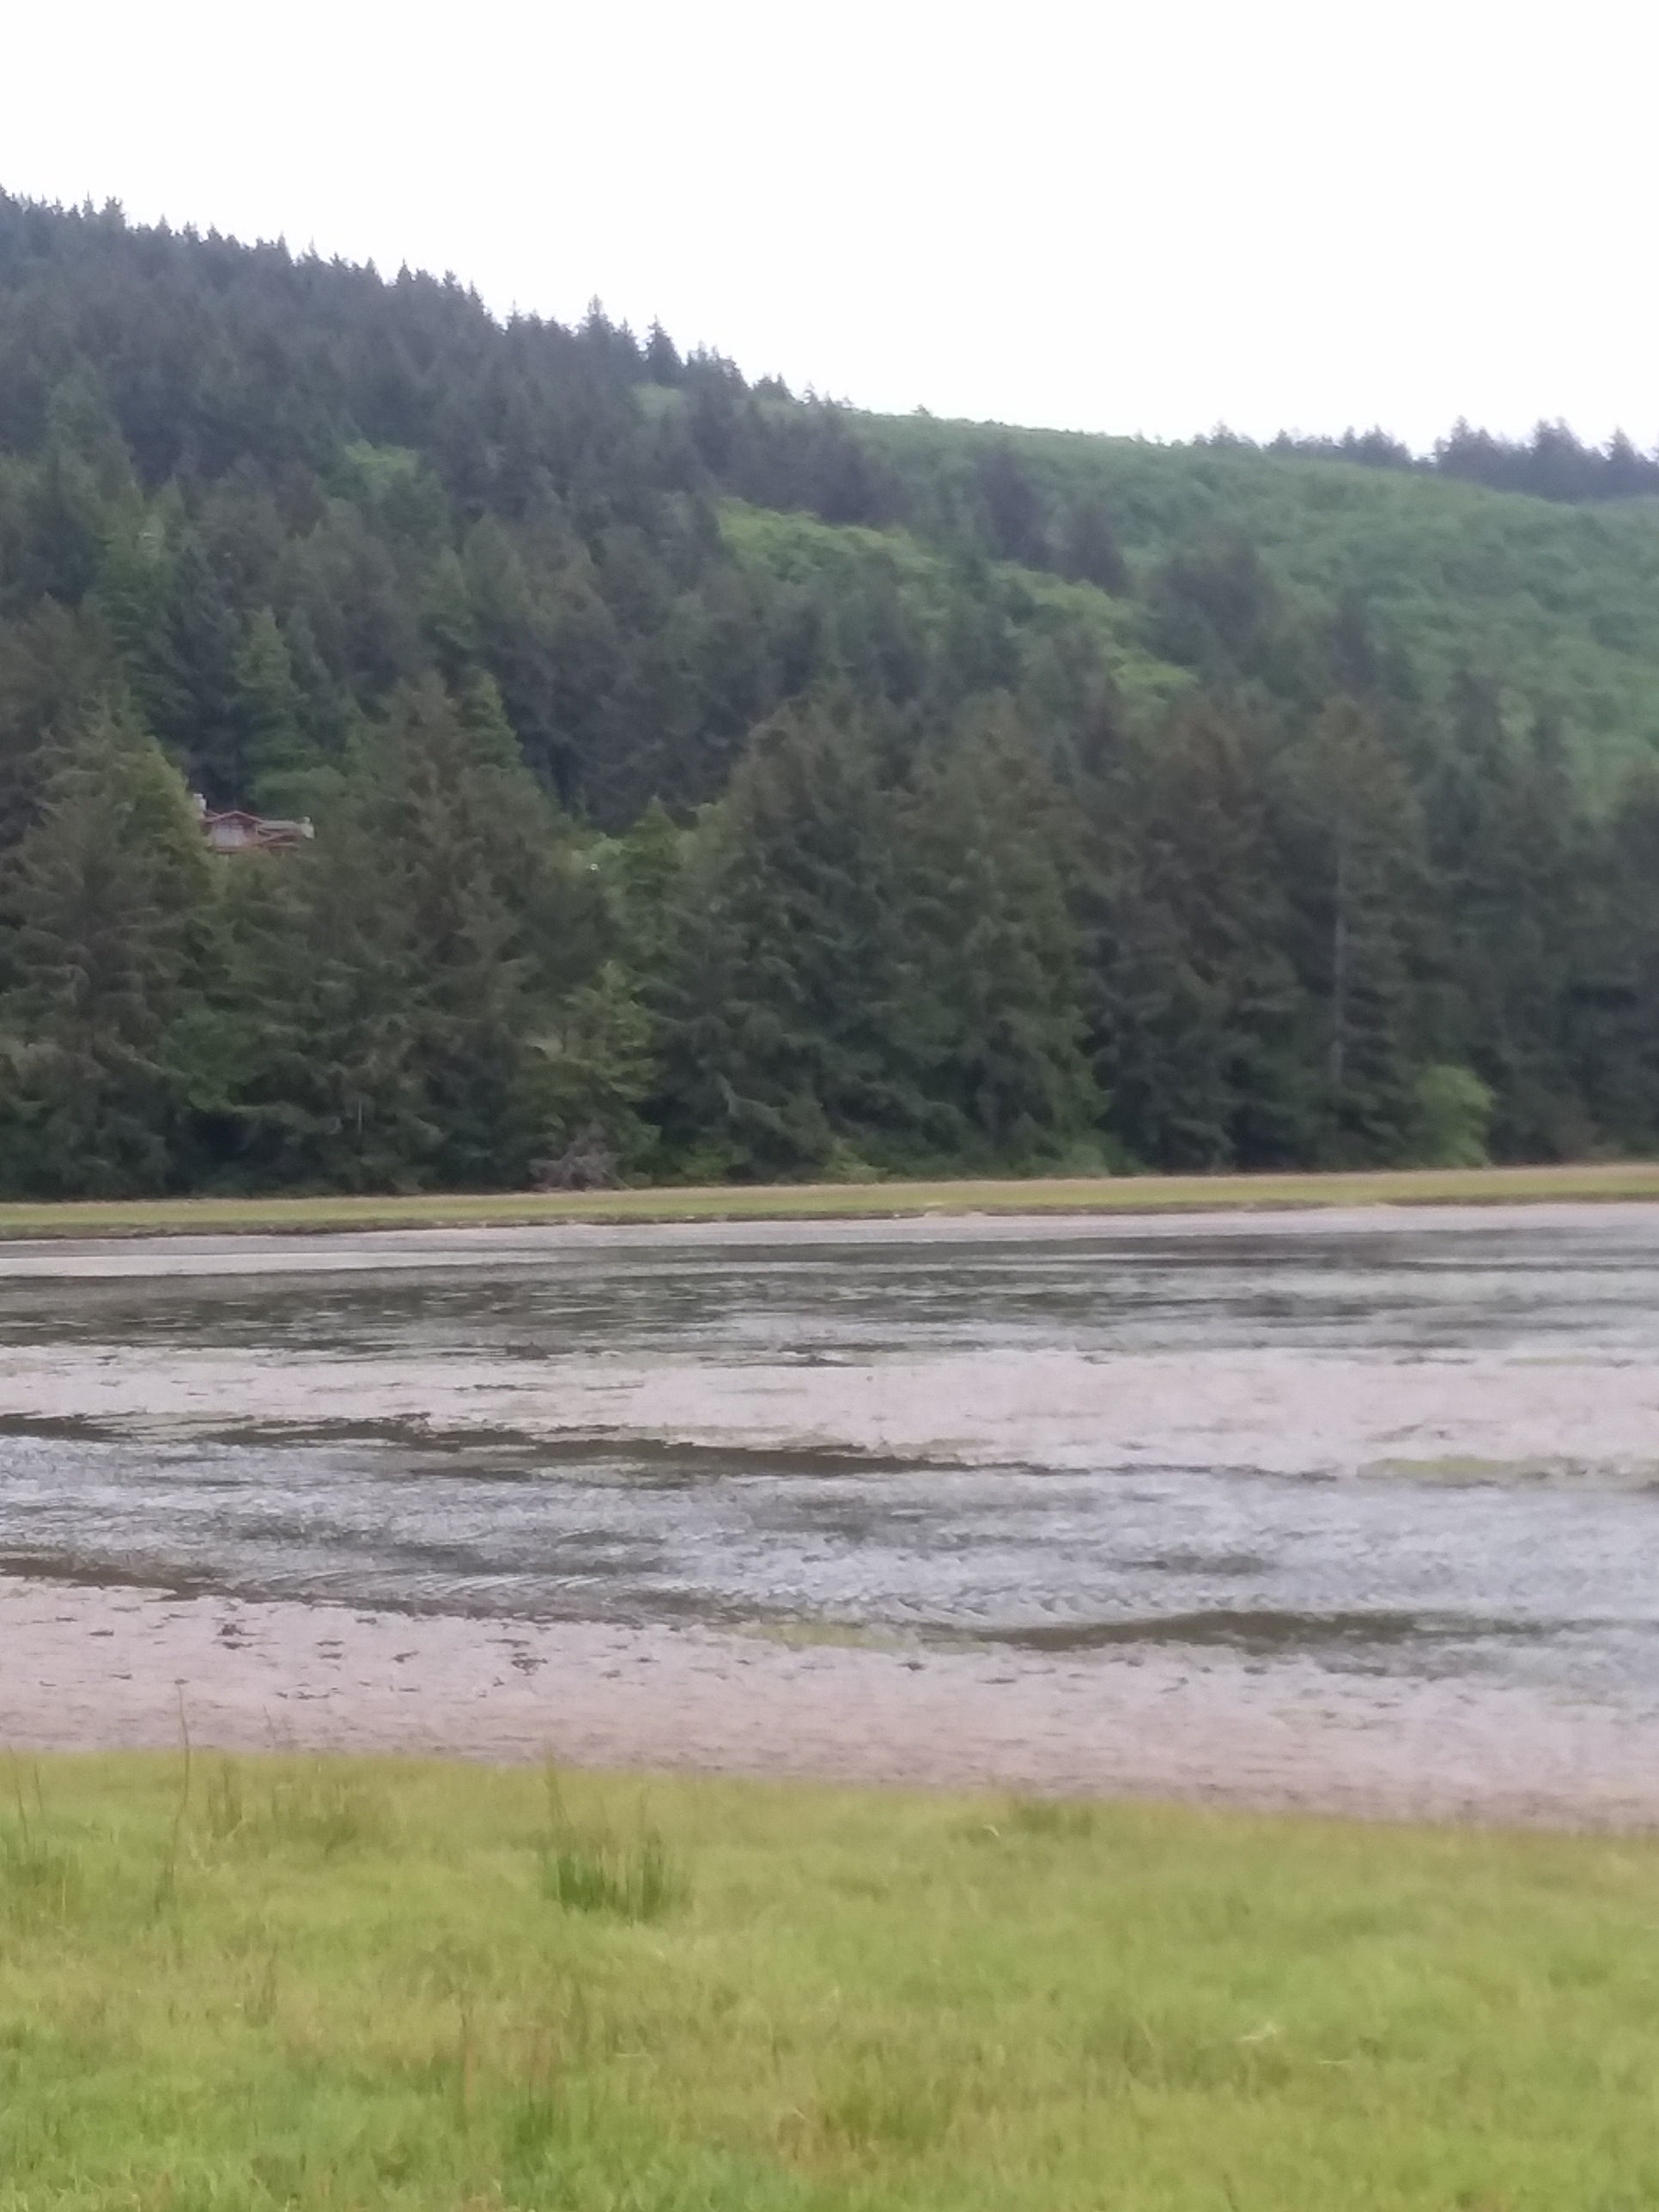 Camper submitted image from Tillamook County Whalen Island - 2